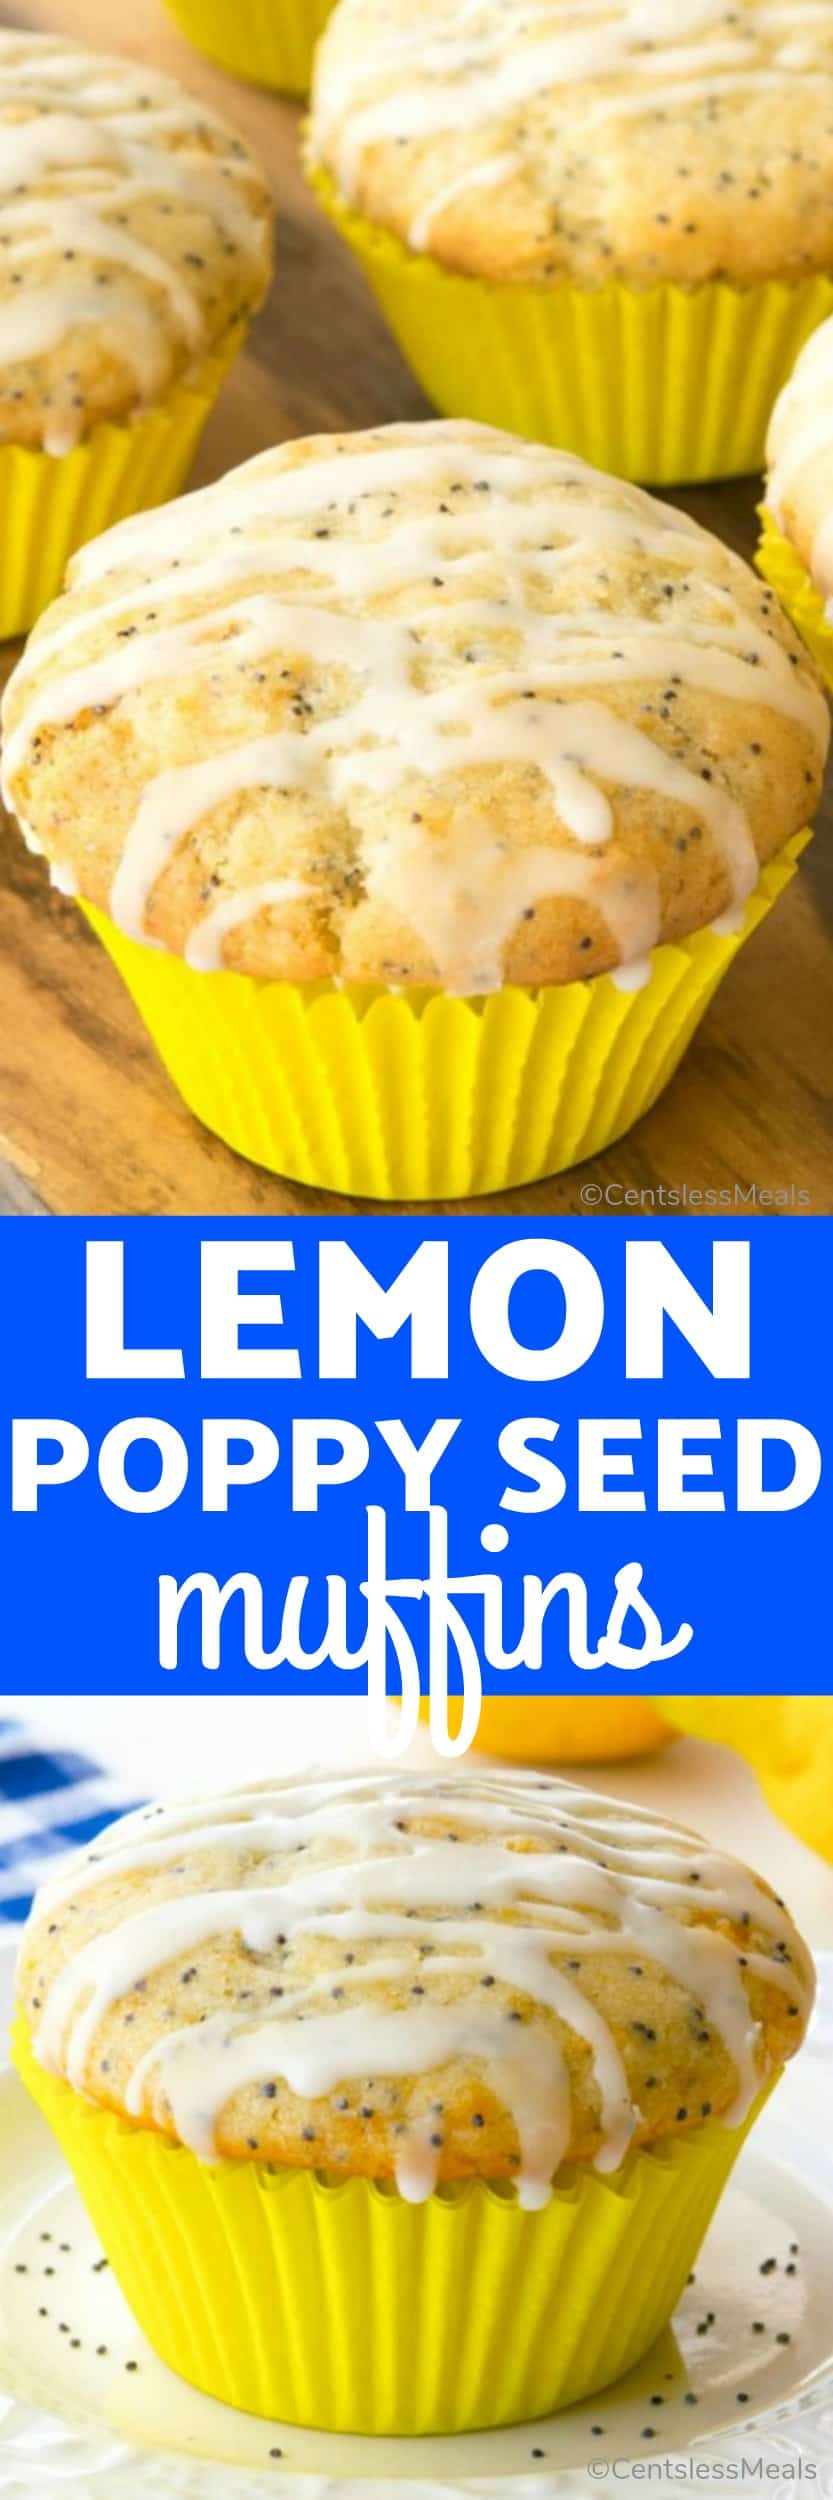 Lemon poppy seed Muffins with a title